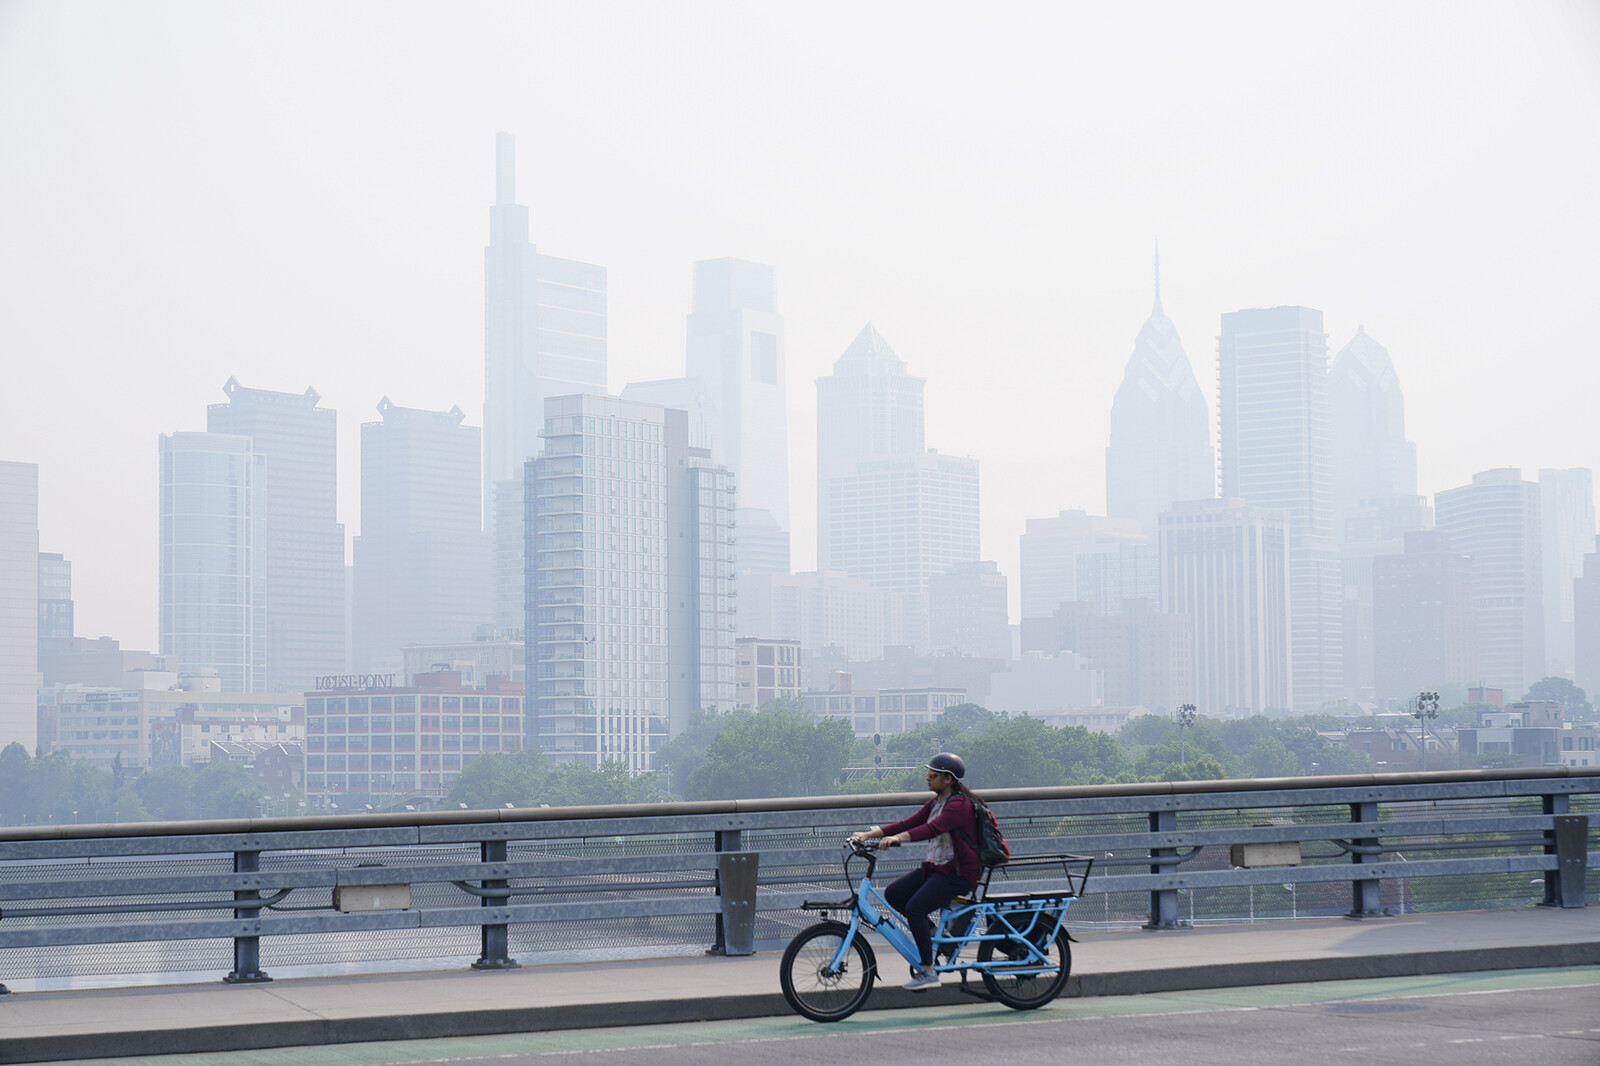 a cyclist rides a bike in front of a smoky philly skyline